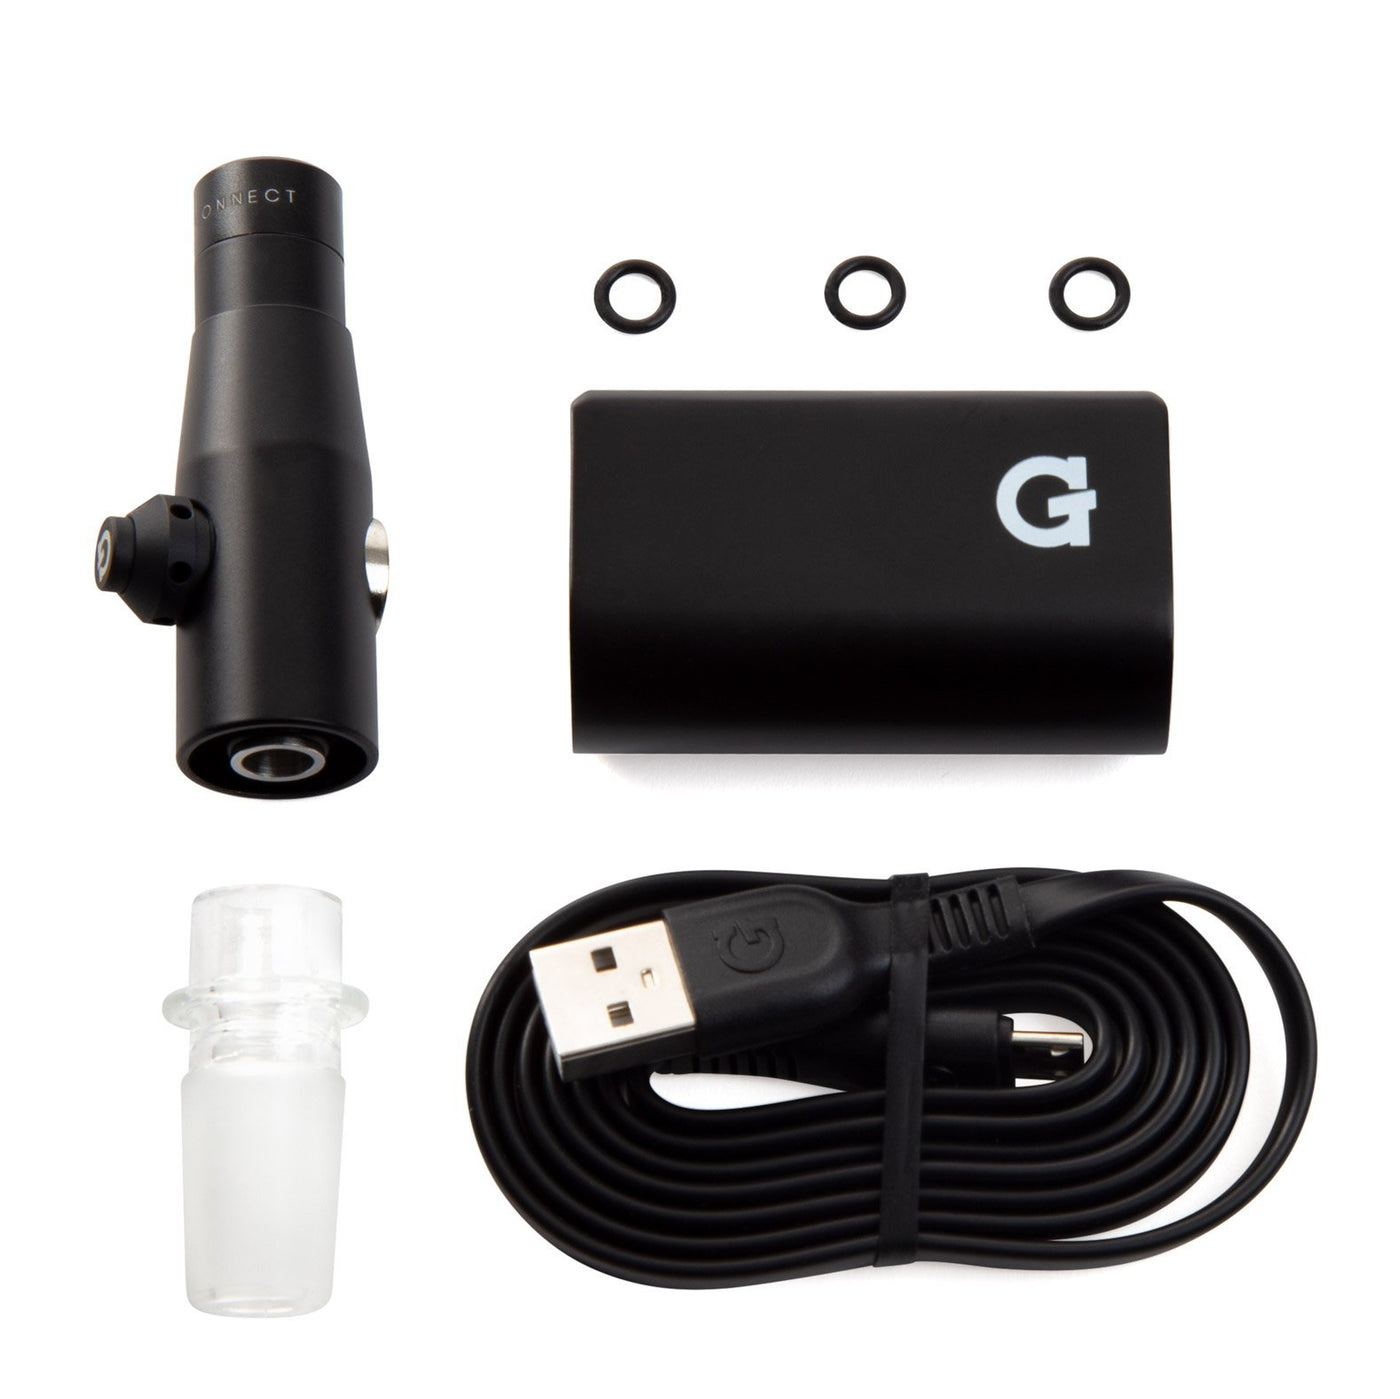 G Pen Connect Wax Vaporizer 119 99 At 4 Science